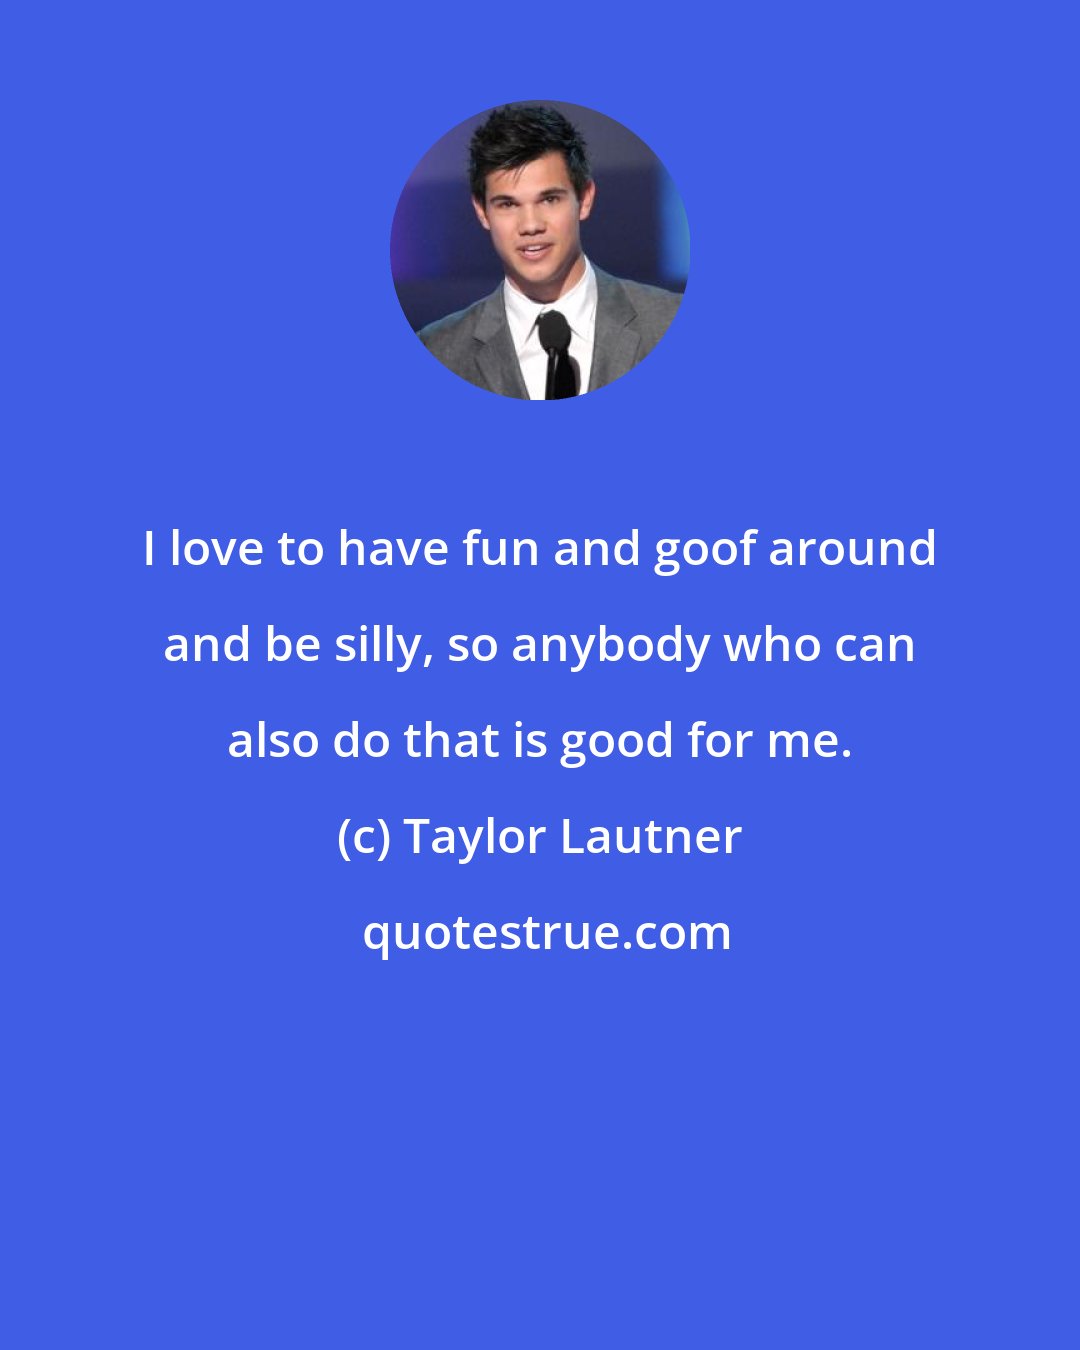 Taylor Lautner: I love to have fun and goof around and be silly, so anybody who can also do that is good for me.